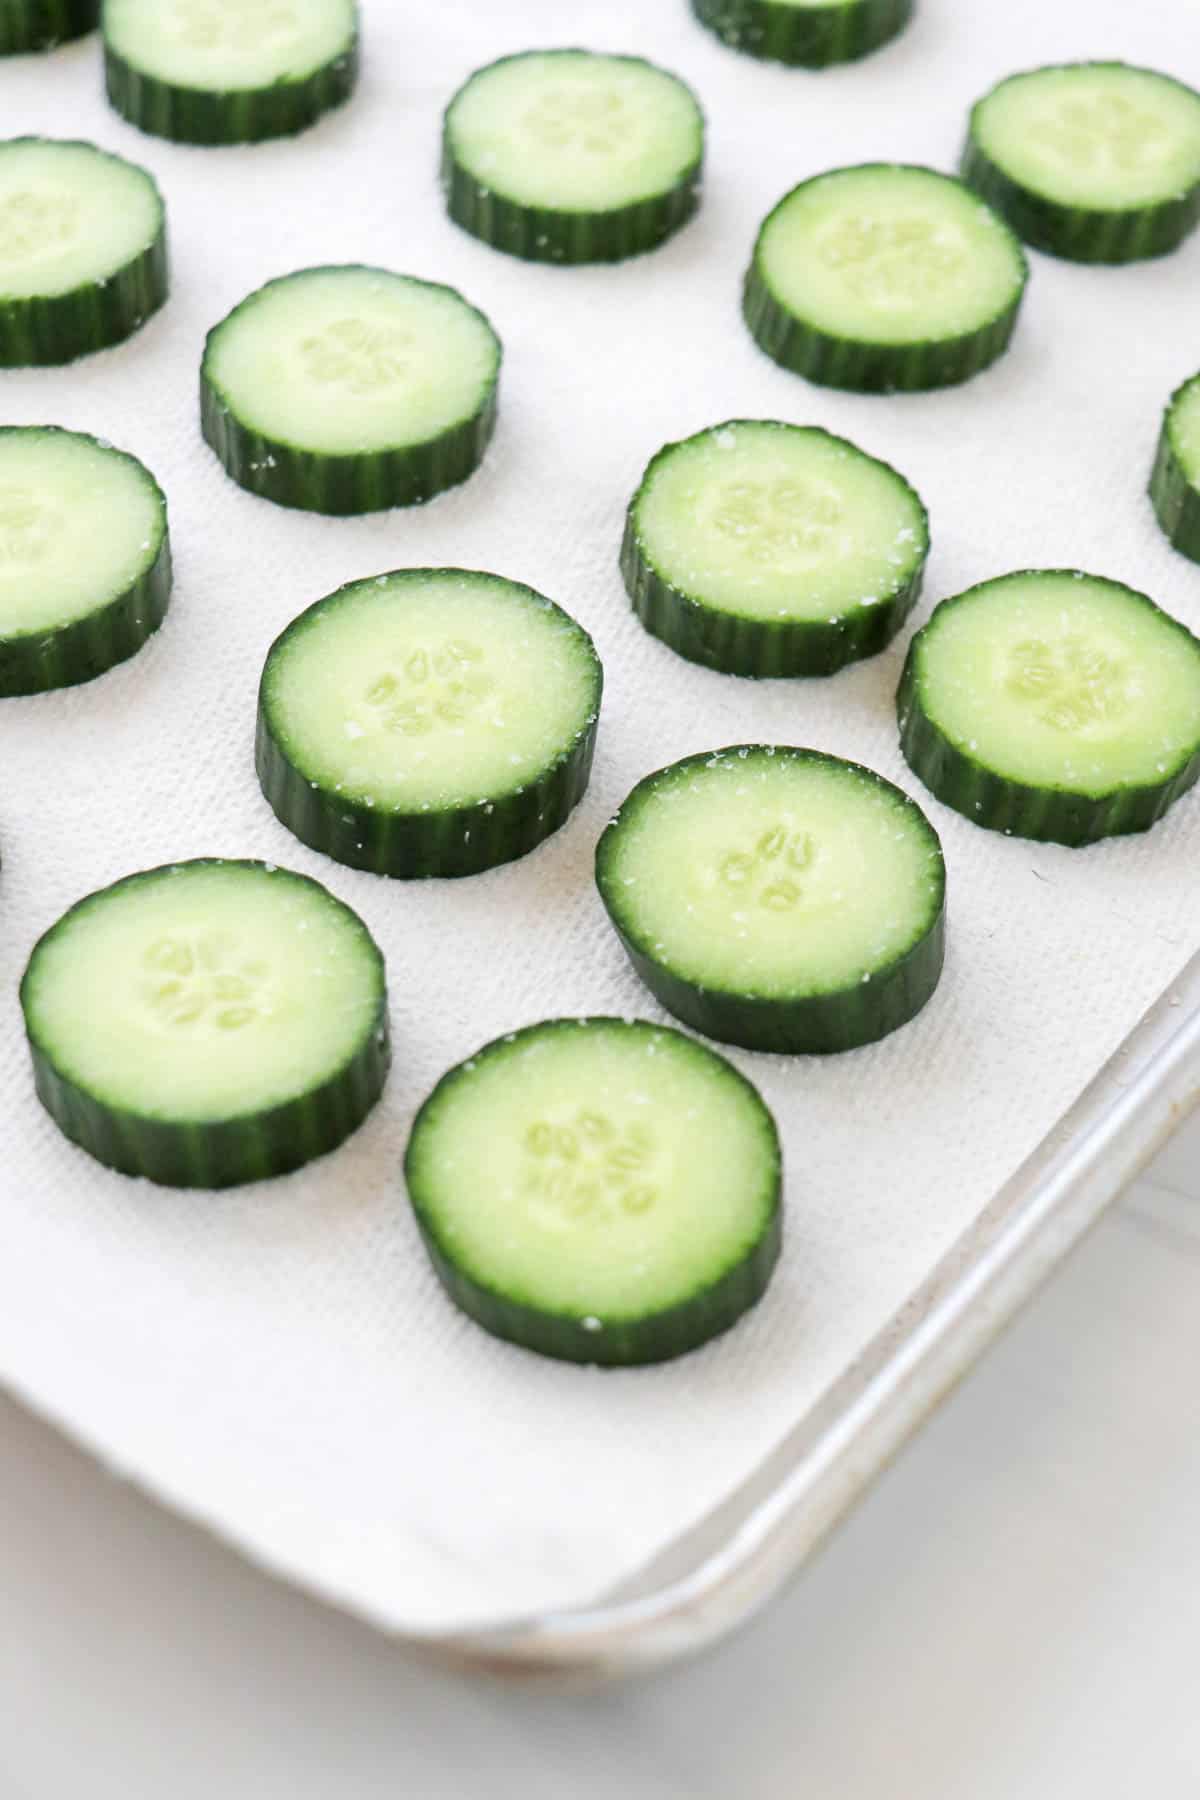 Salted cucumber rounds on a paper towel lined baking sheet.